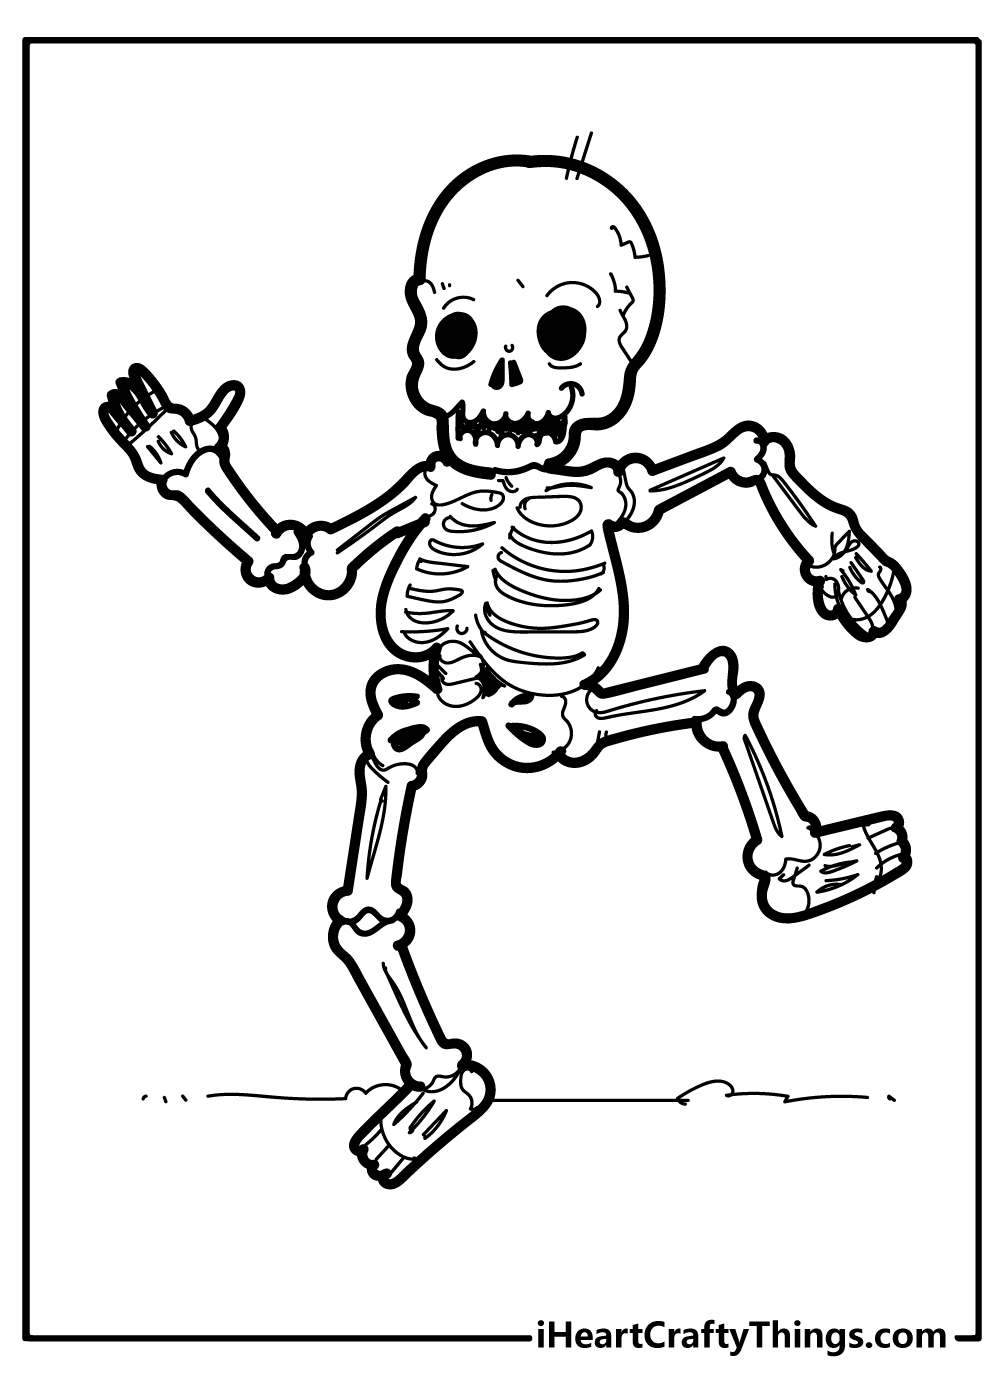 Skeleton Coloring Pages for kids free download